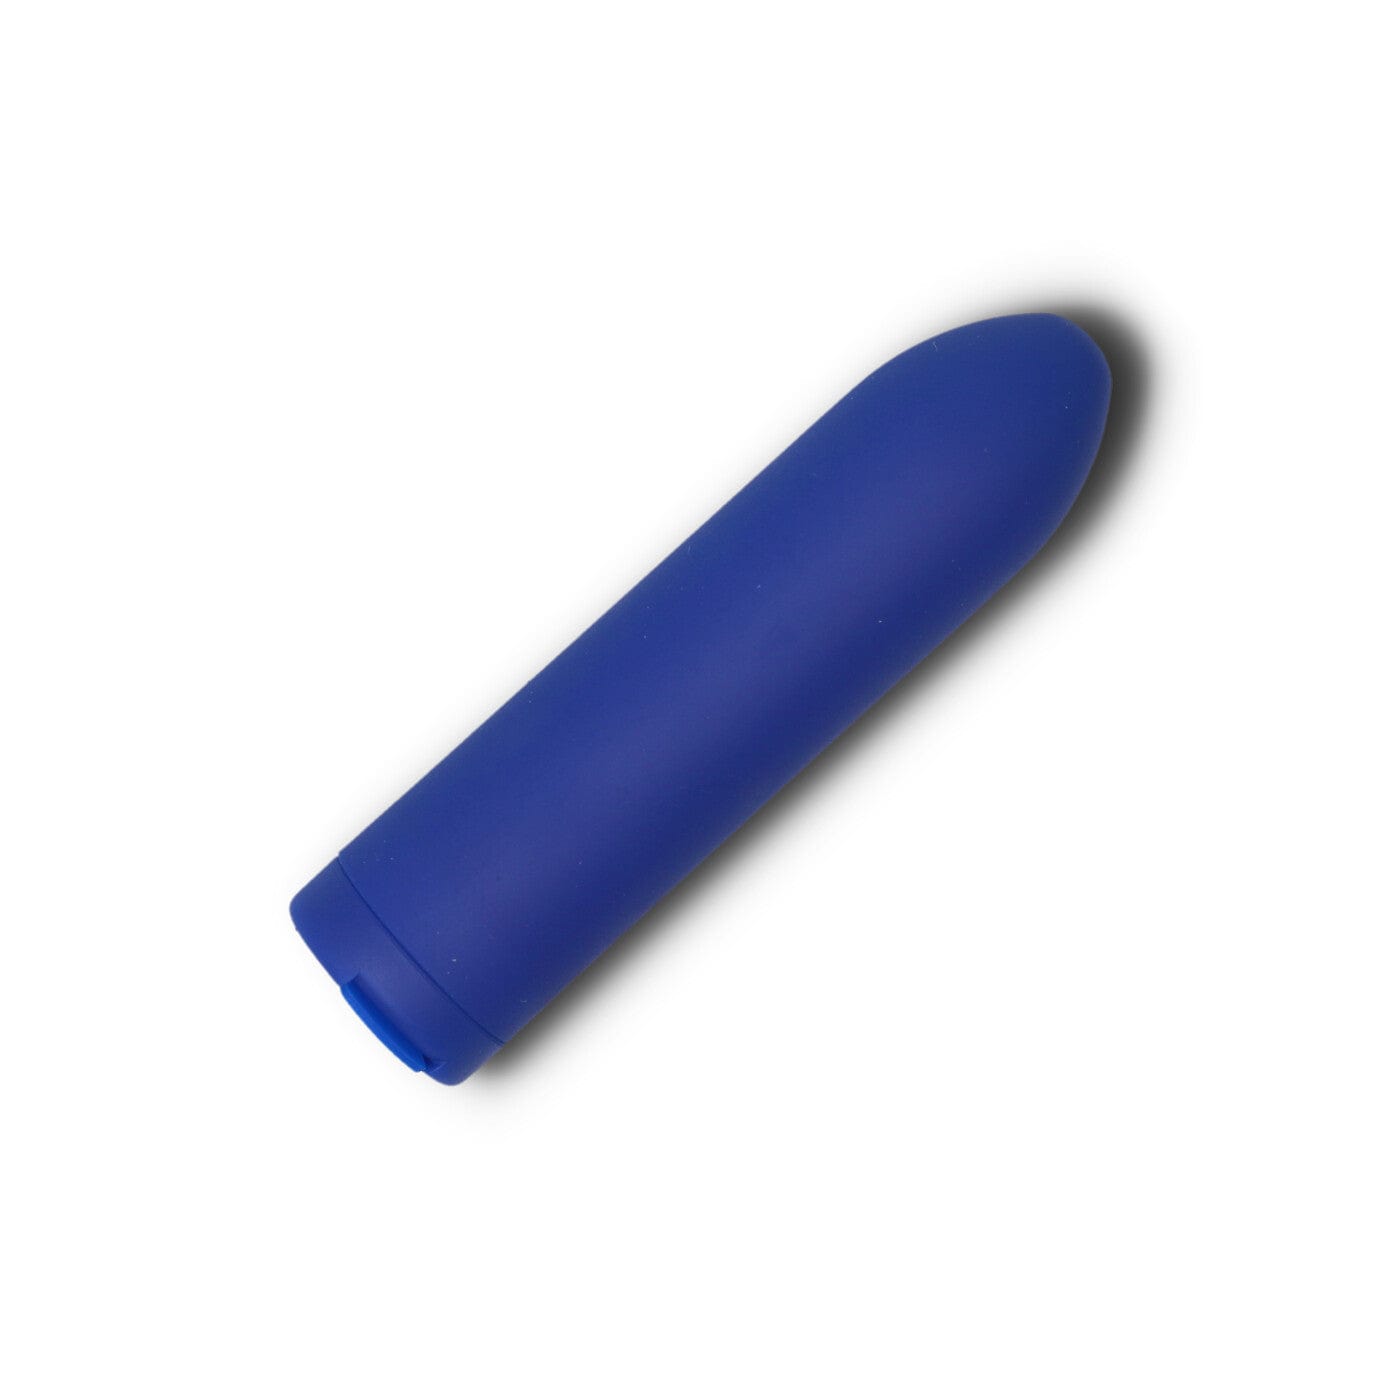 Zee vibrator fra Dame products